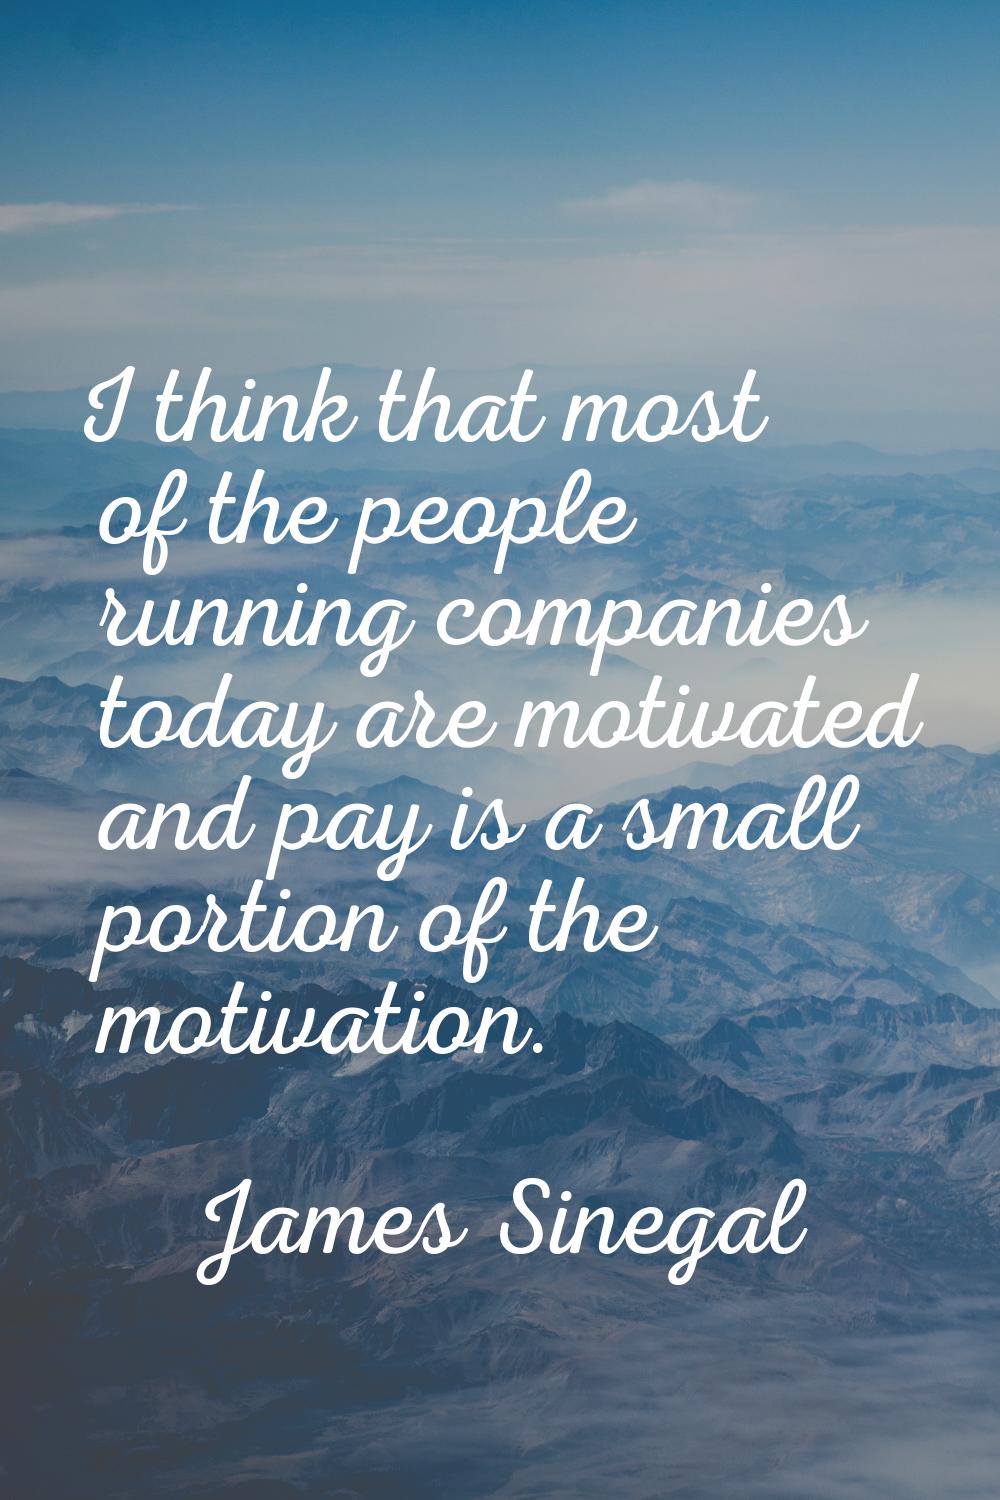 I think that most of the people running companies today are motivated and pay is a small portion of